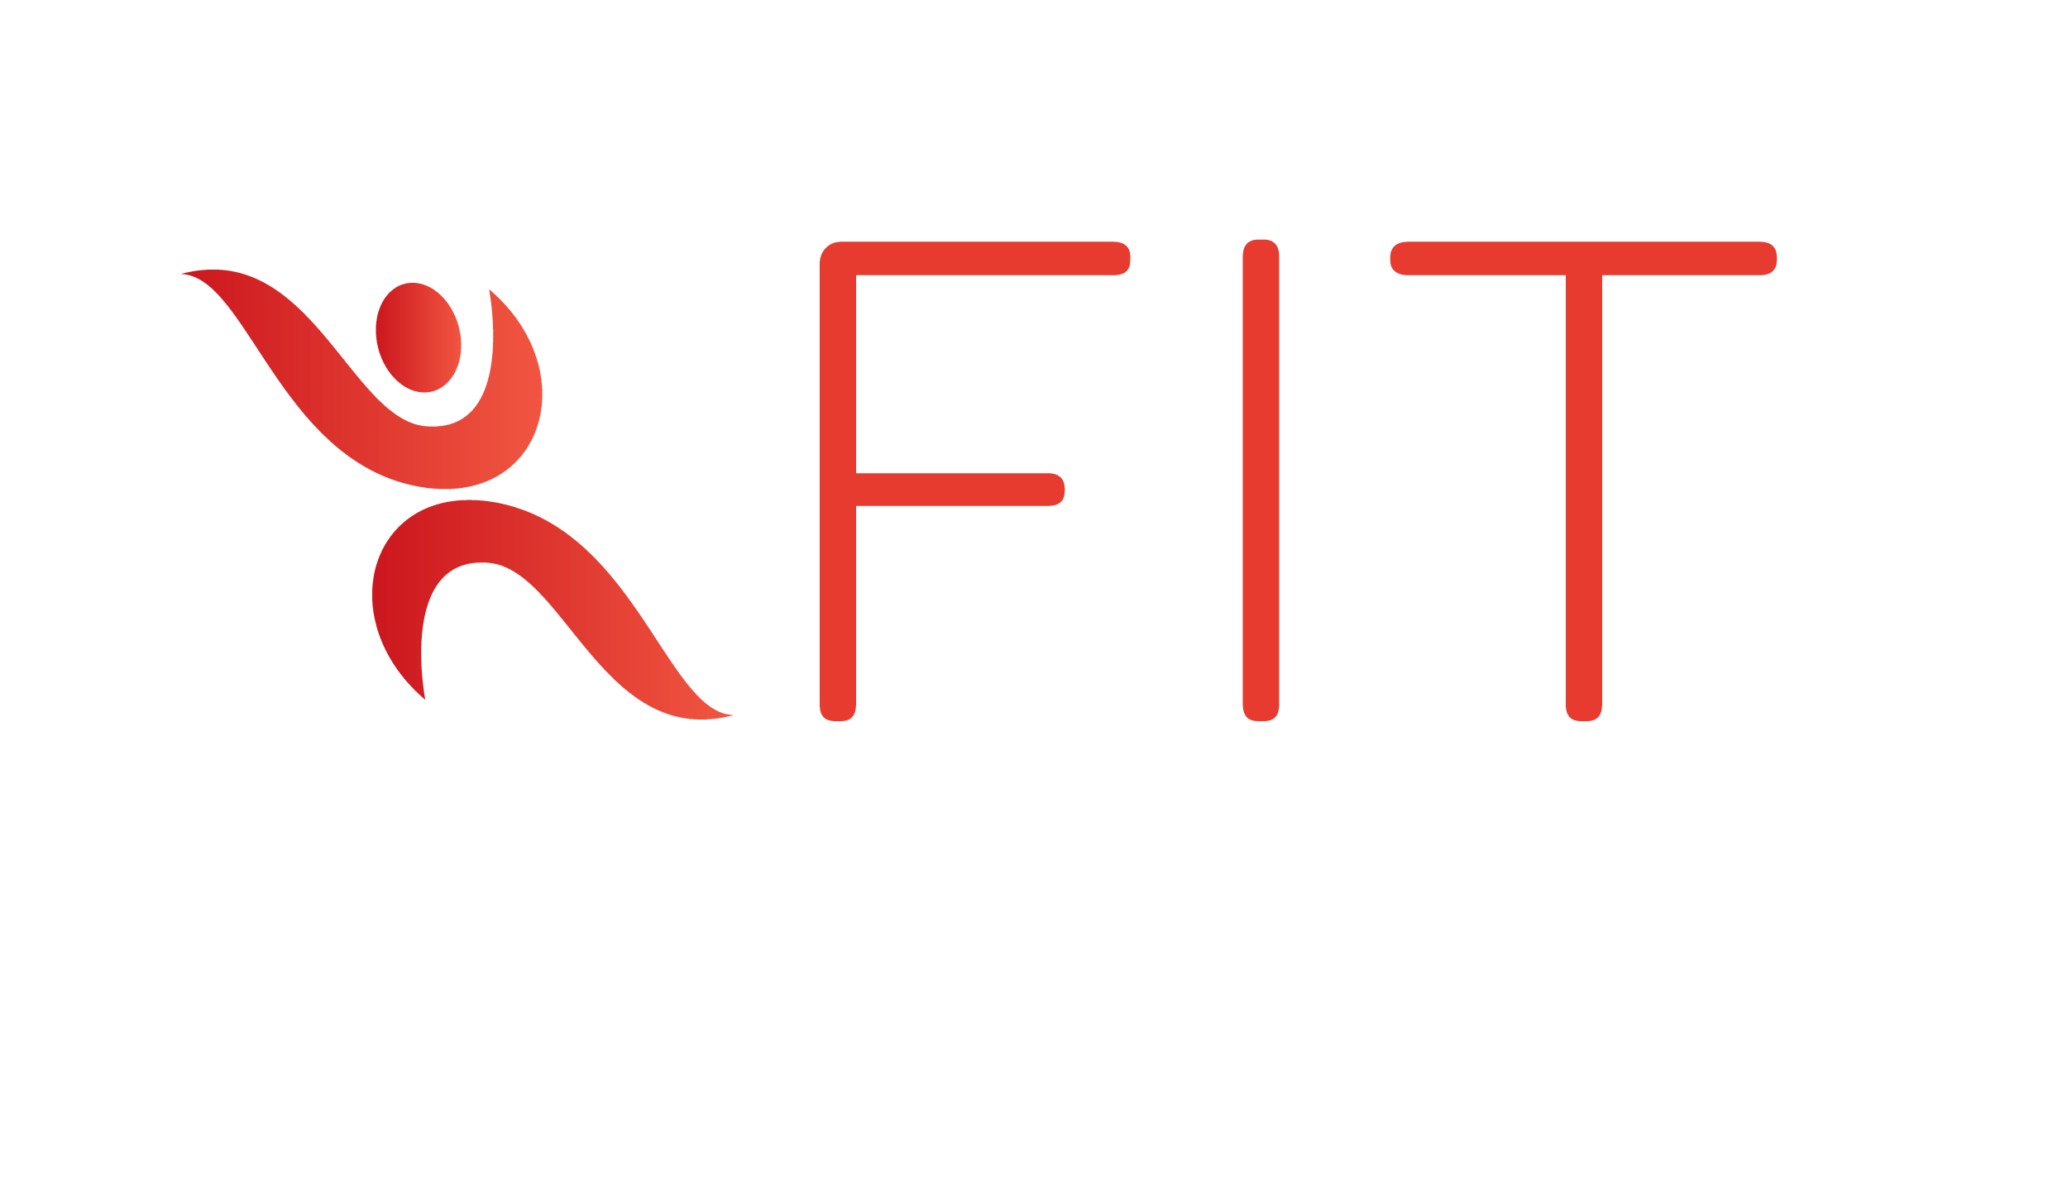 fit company in grand junction